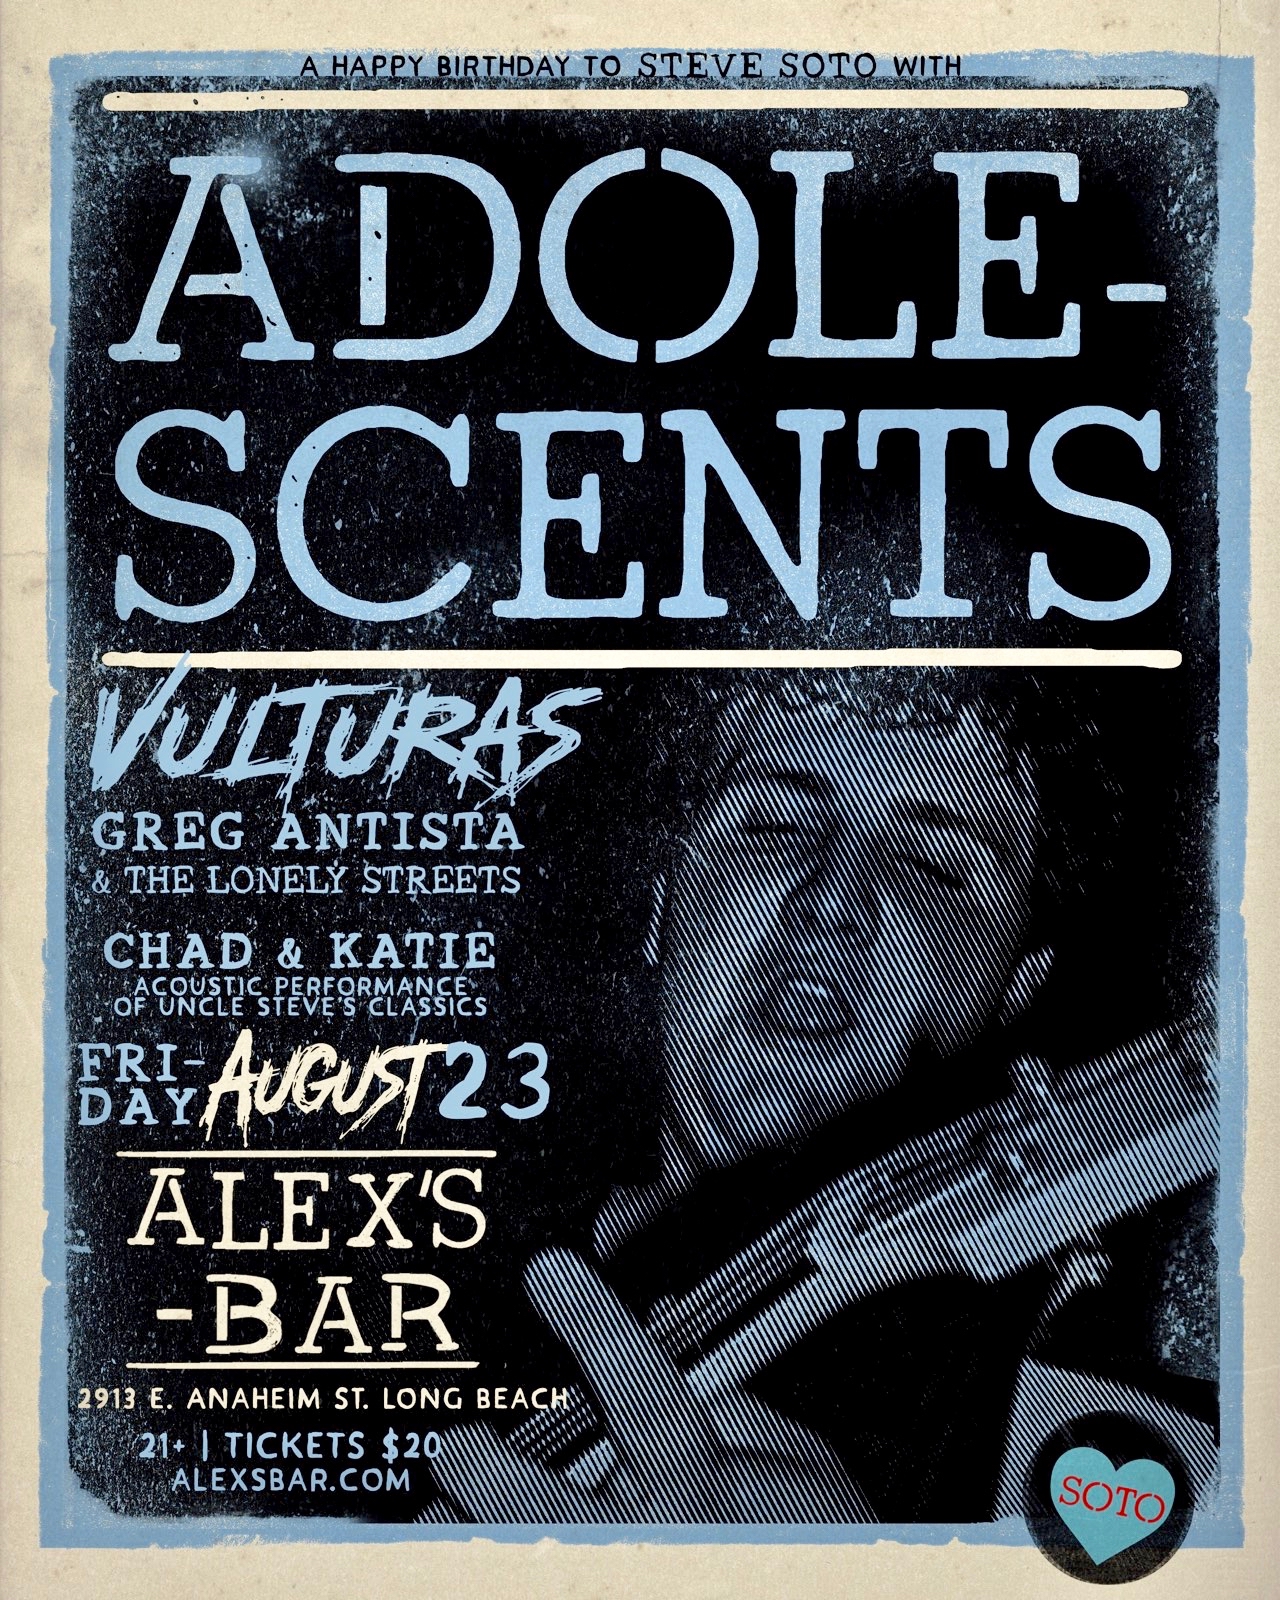 Steve Soto Birthday Celebration with Adolescents, Vulturas, Greg Antista & the Lonely Streets